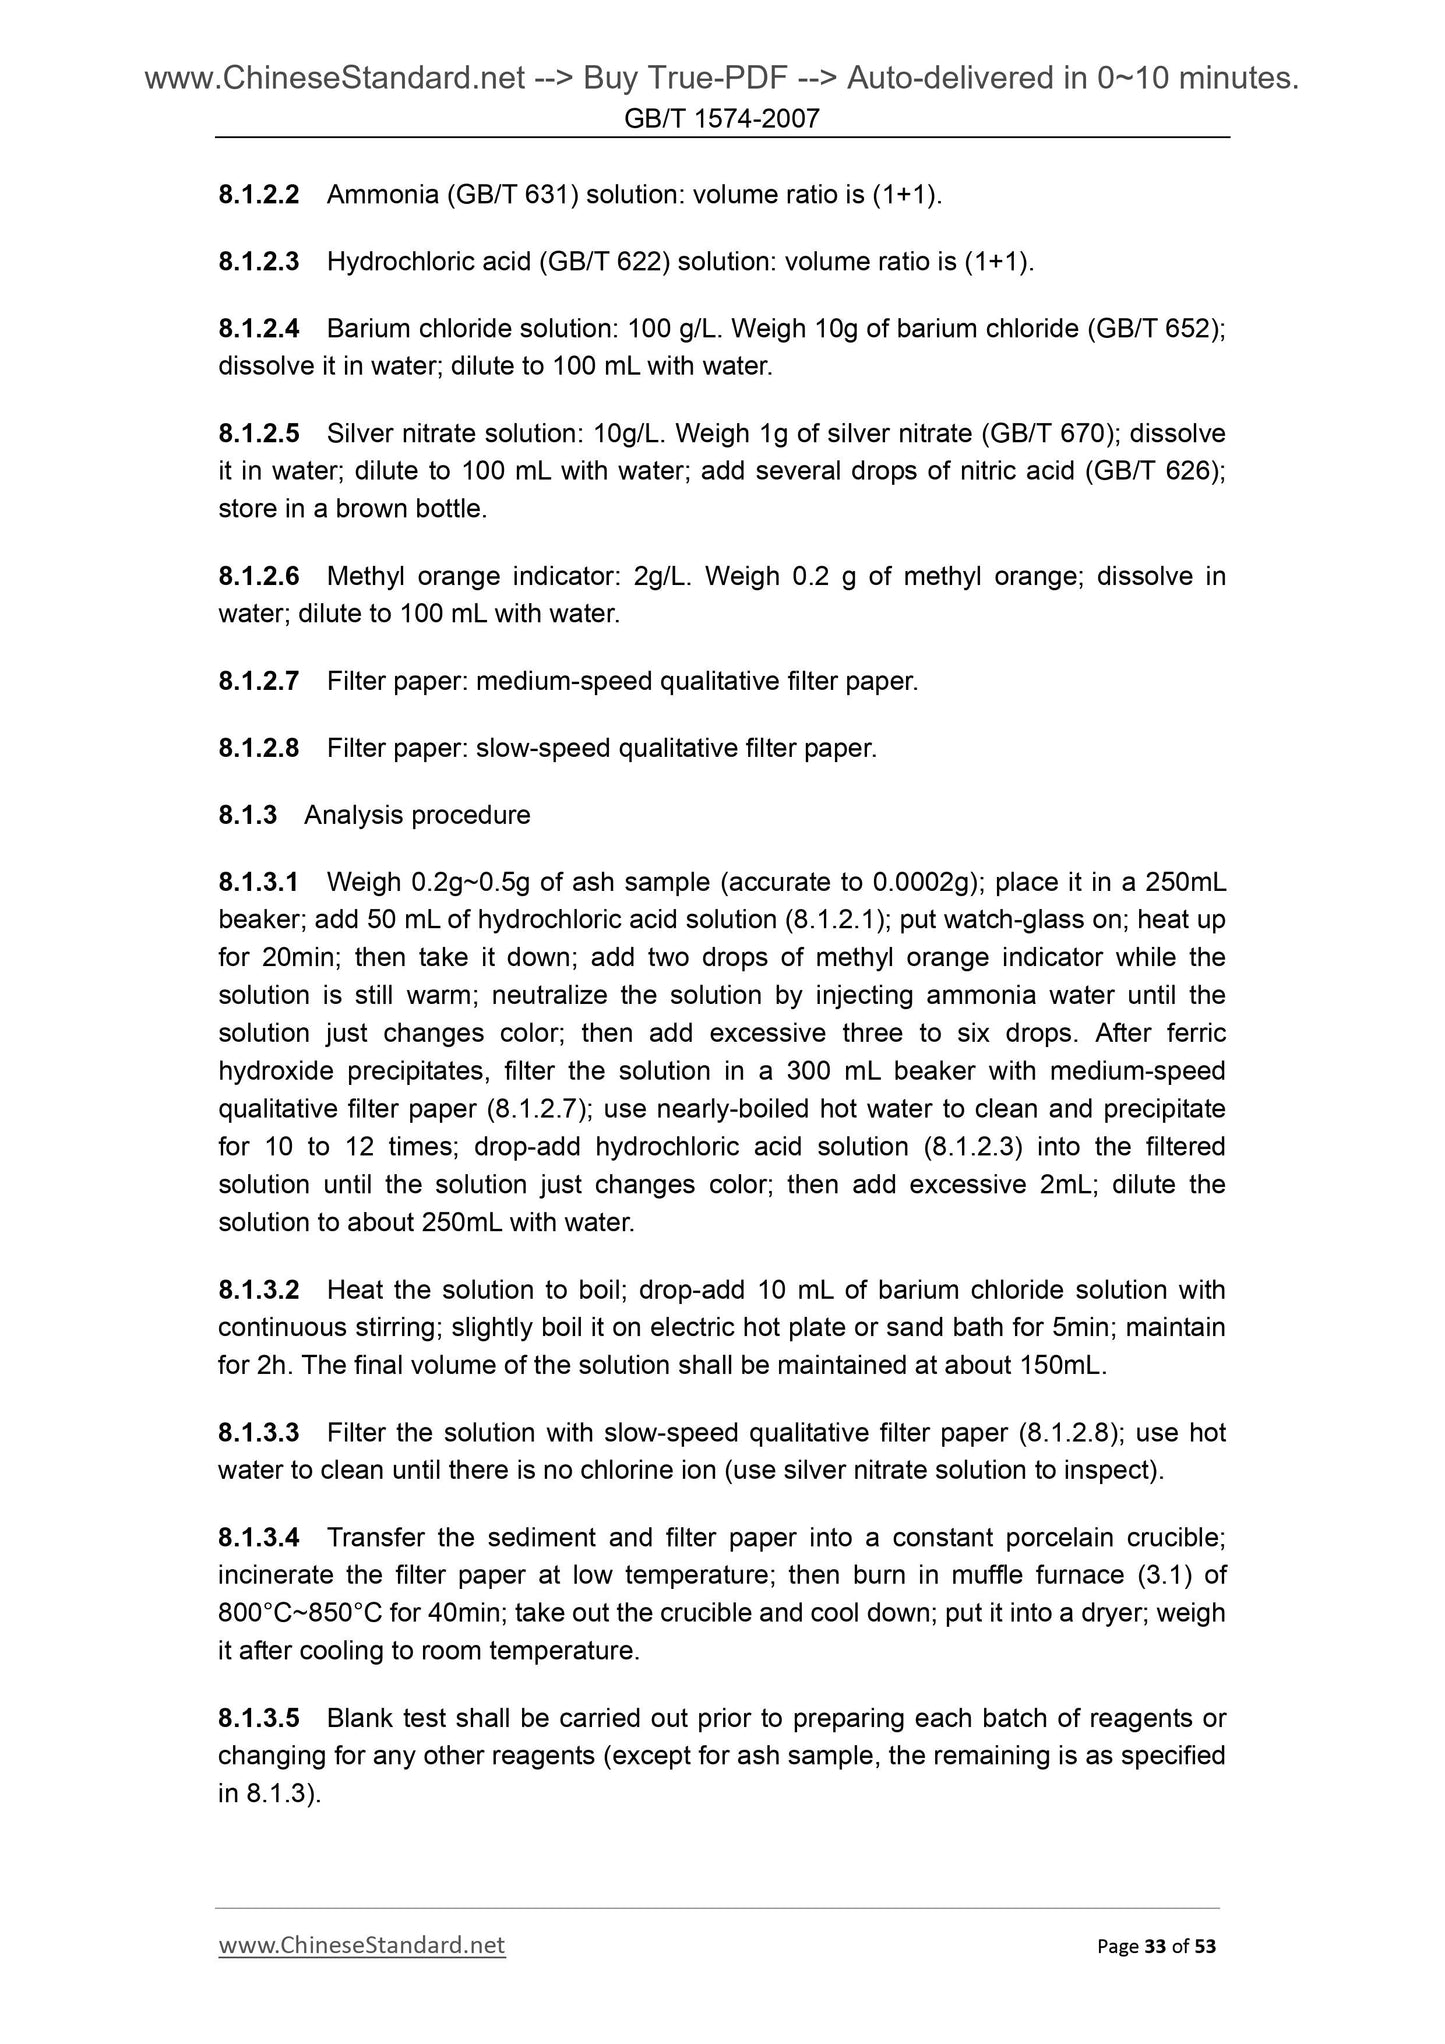 GB/T 1574-2007 Page 9